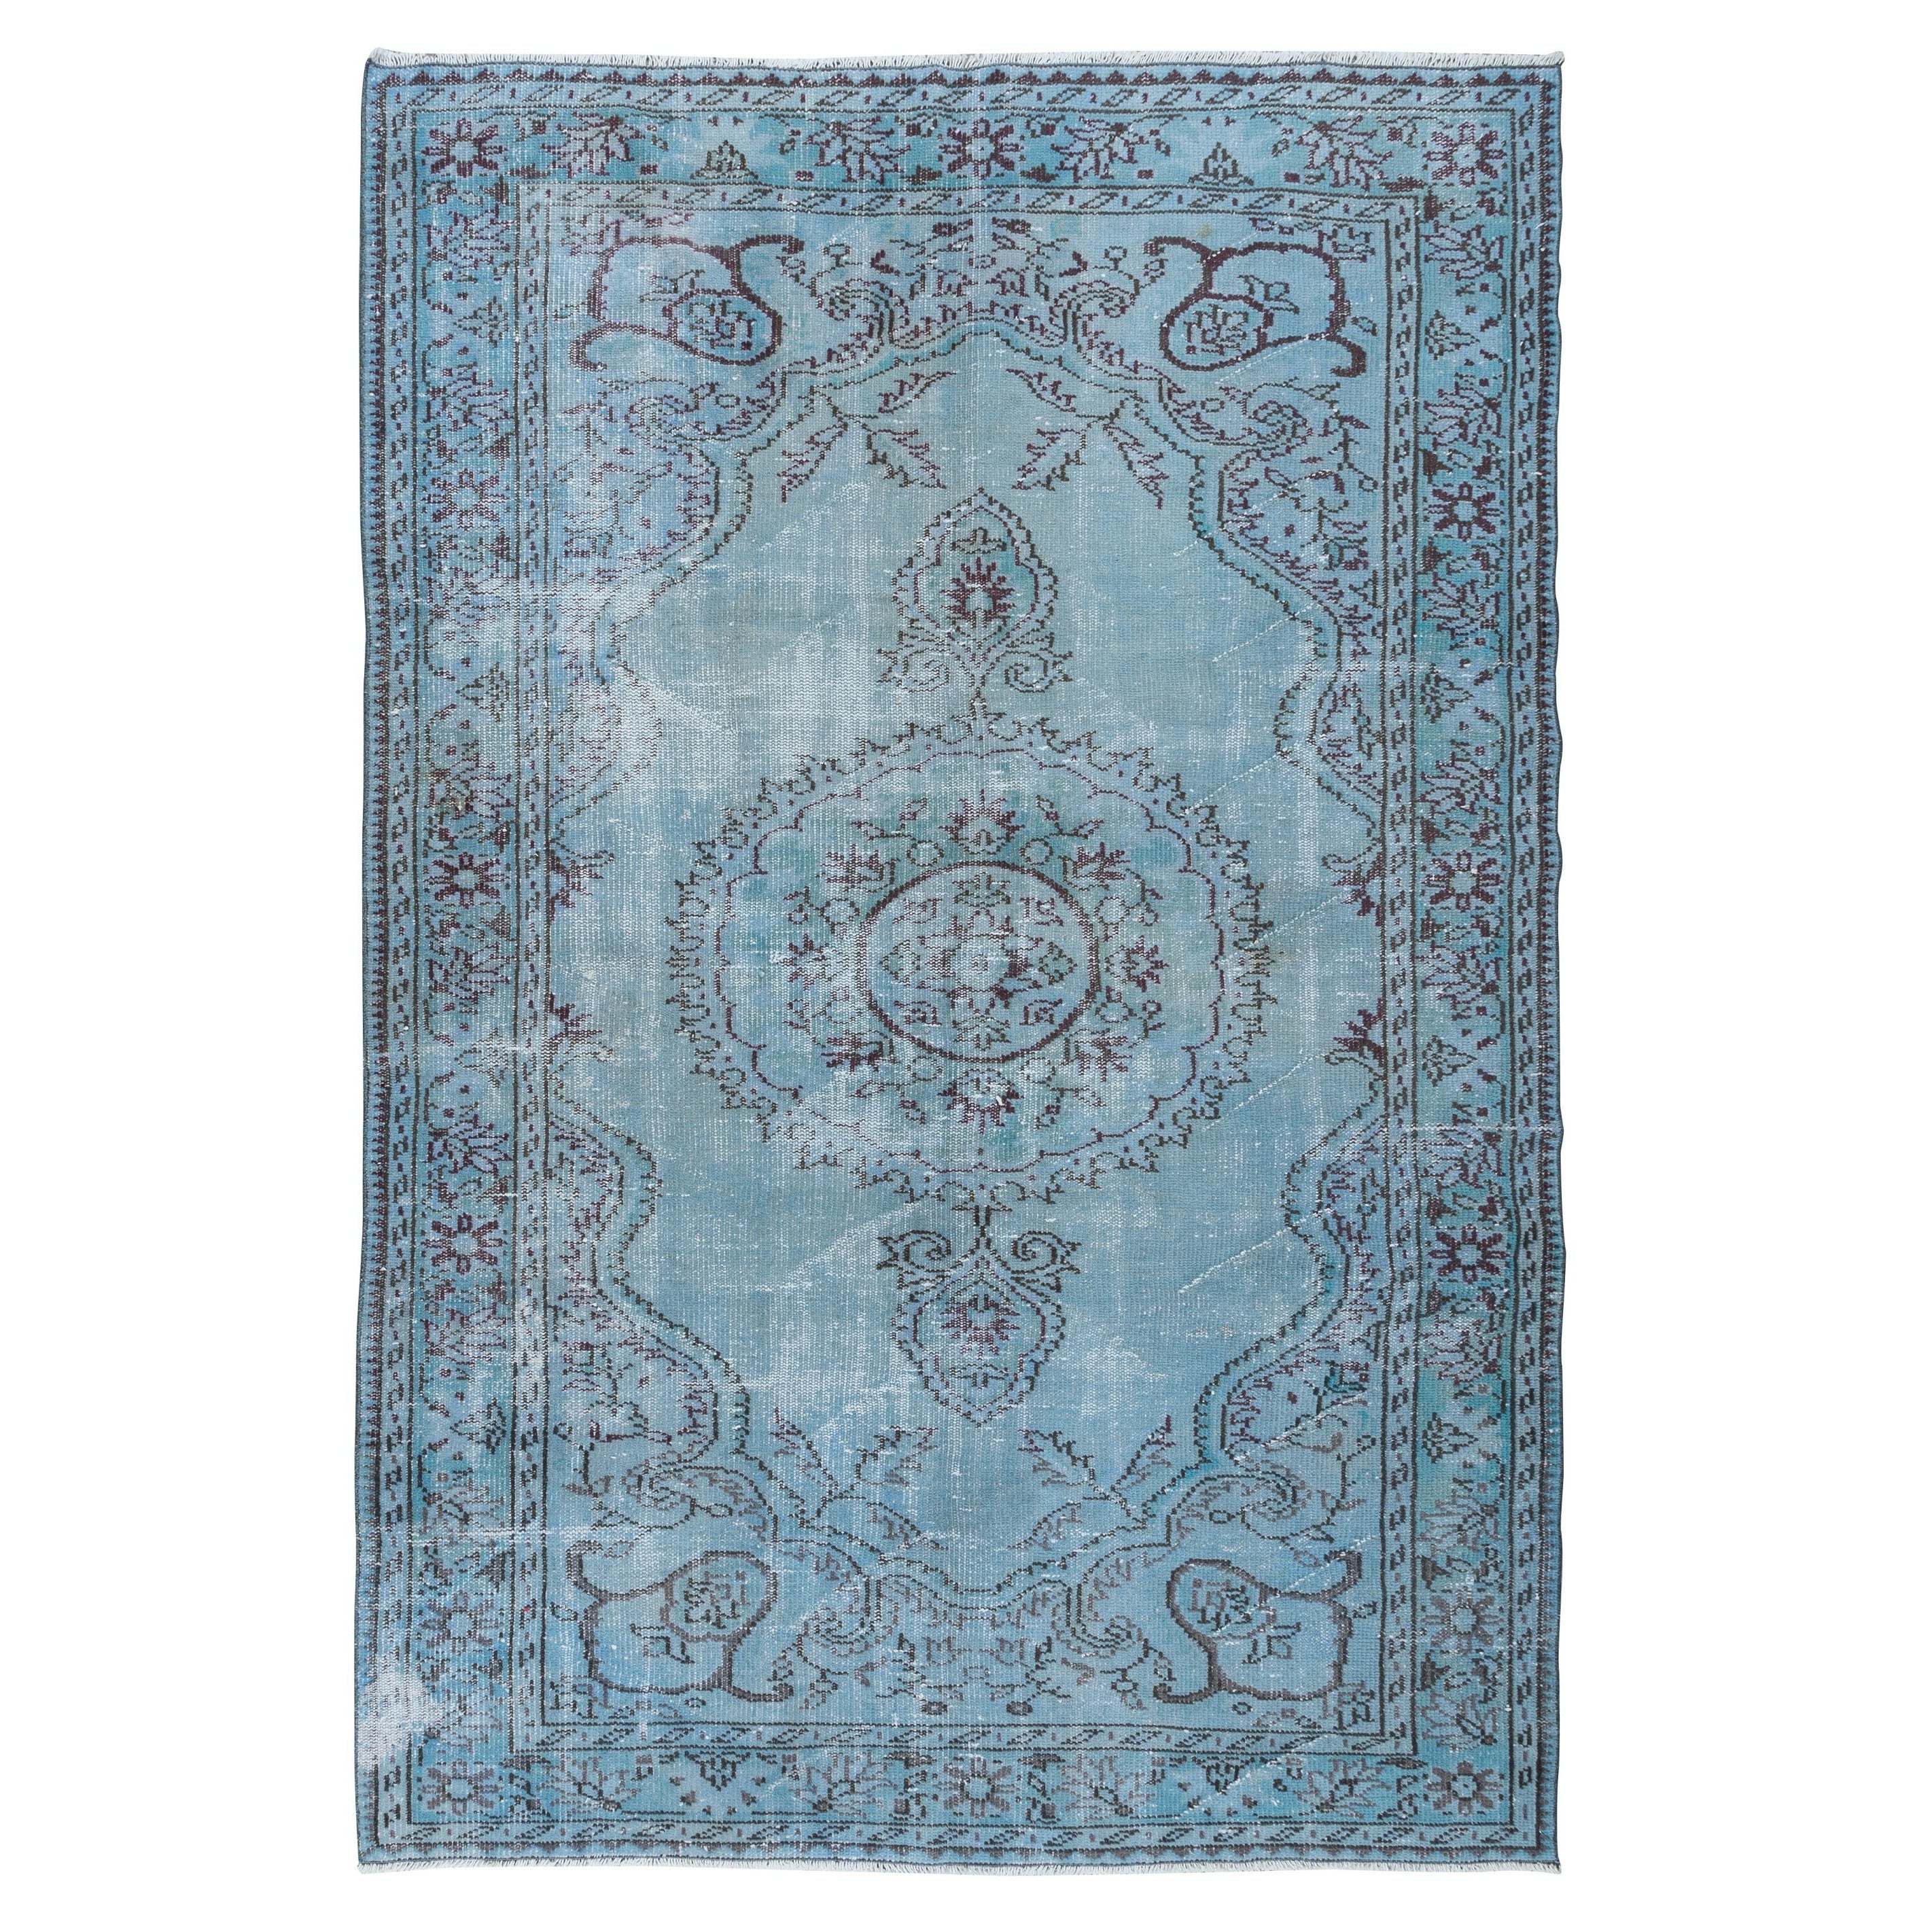 6x8.7 Ft Handmade Turkish Rug Over-Dyed in Light Blue, Contemporary Carpet